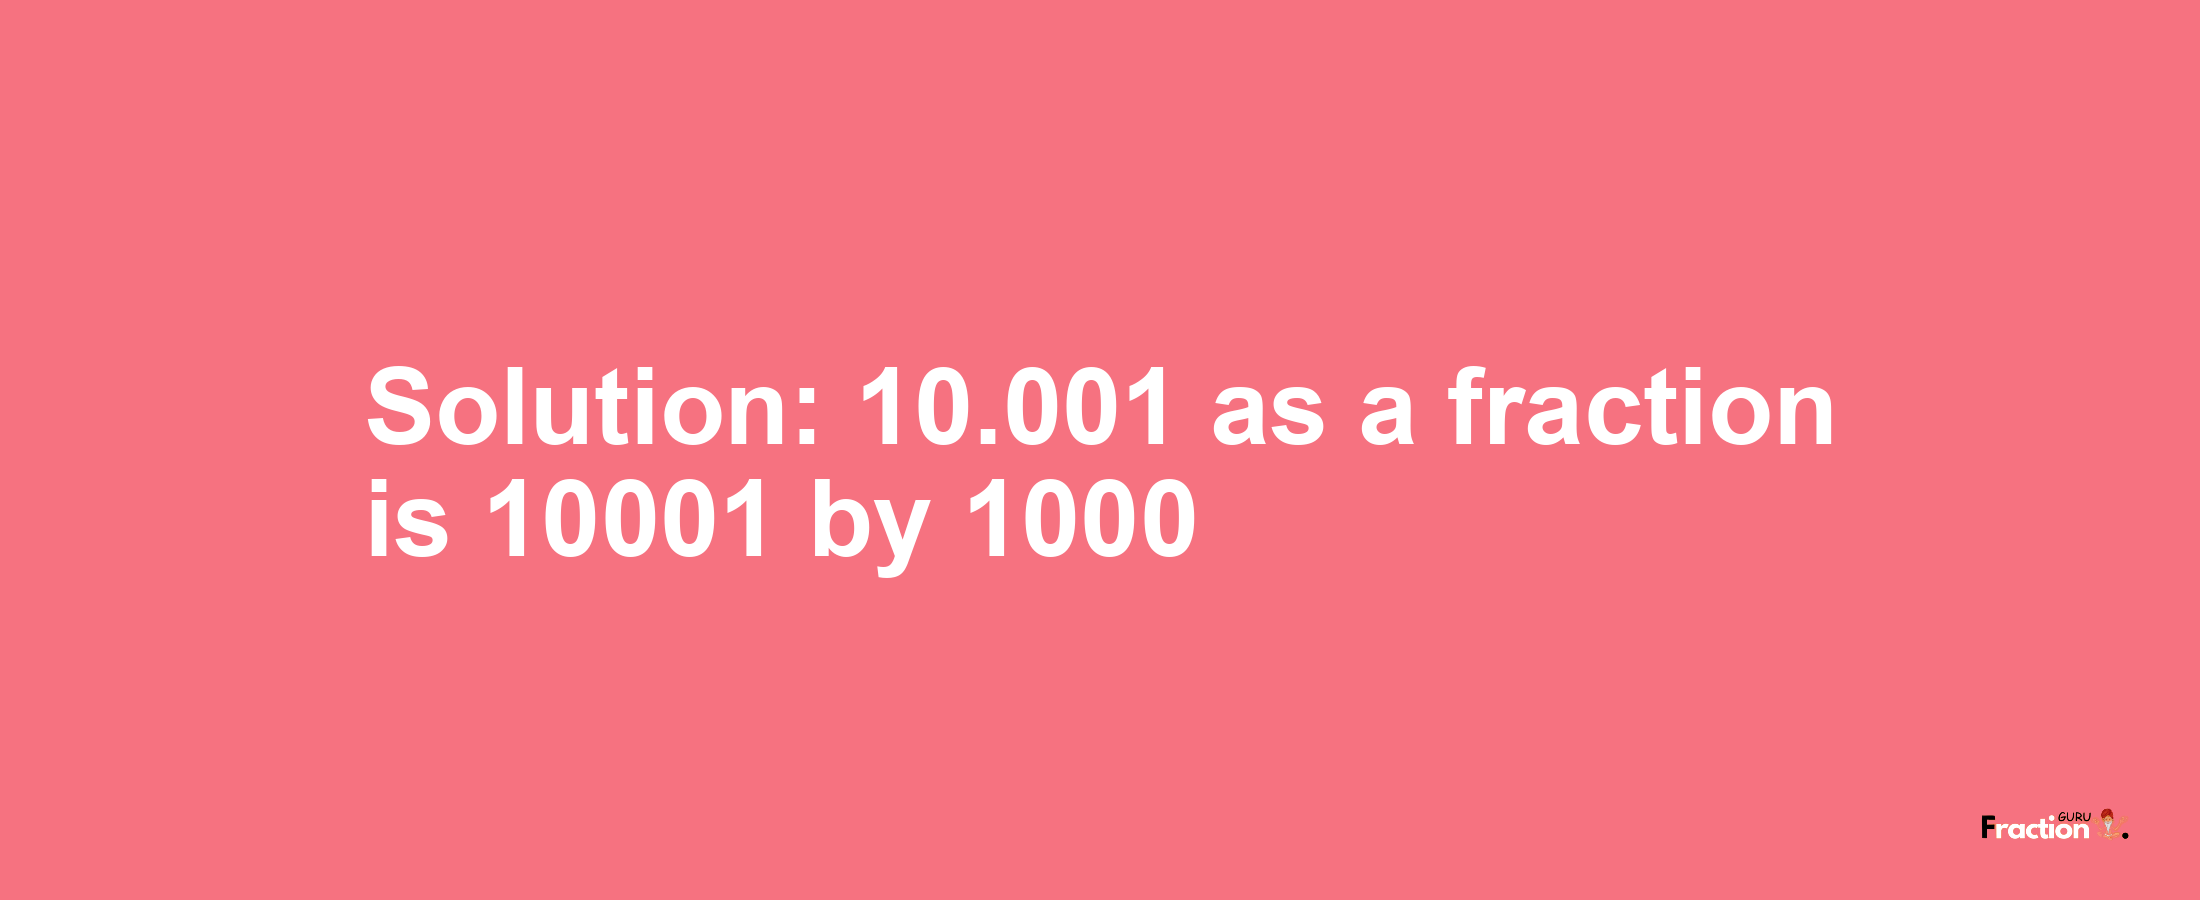 Solution:10.001 as a fraction is 10001/1000